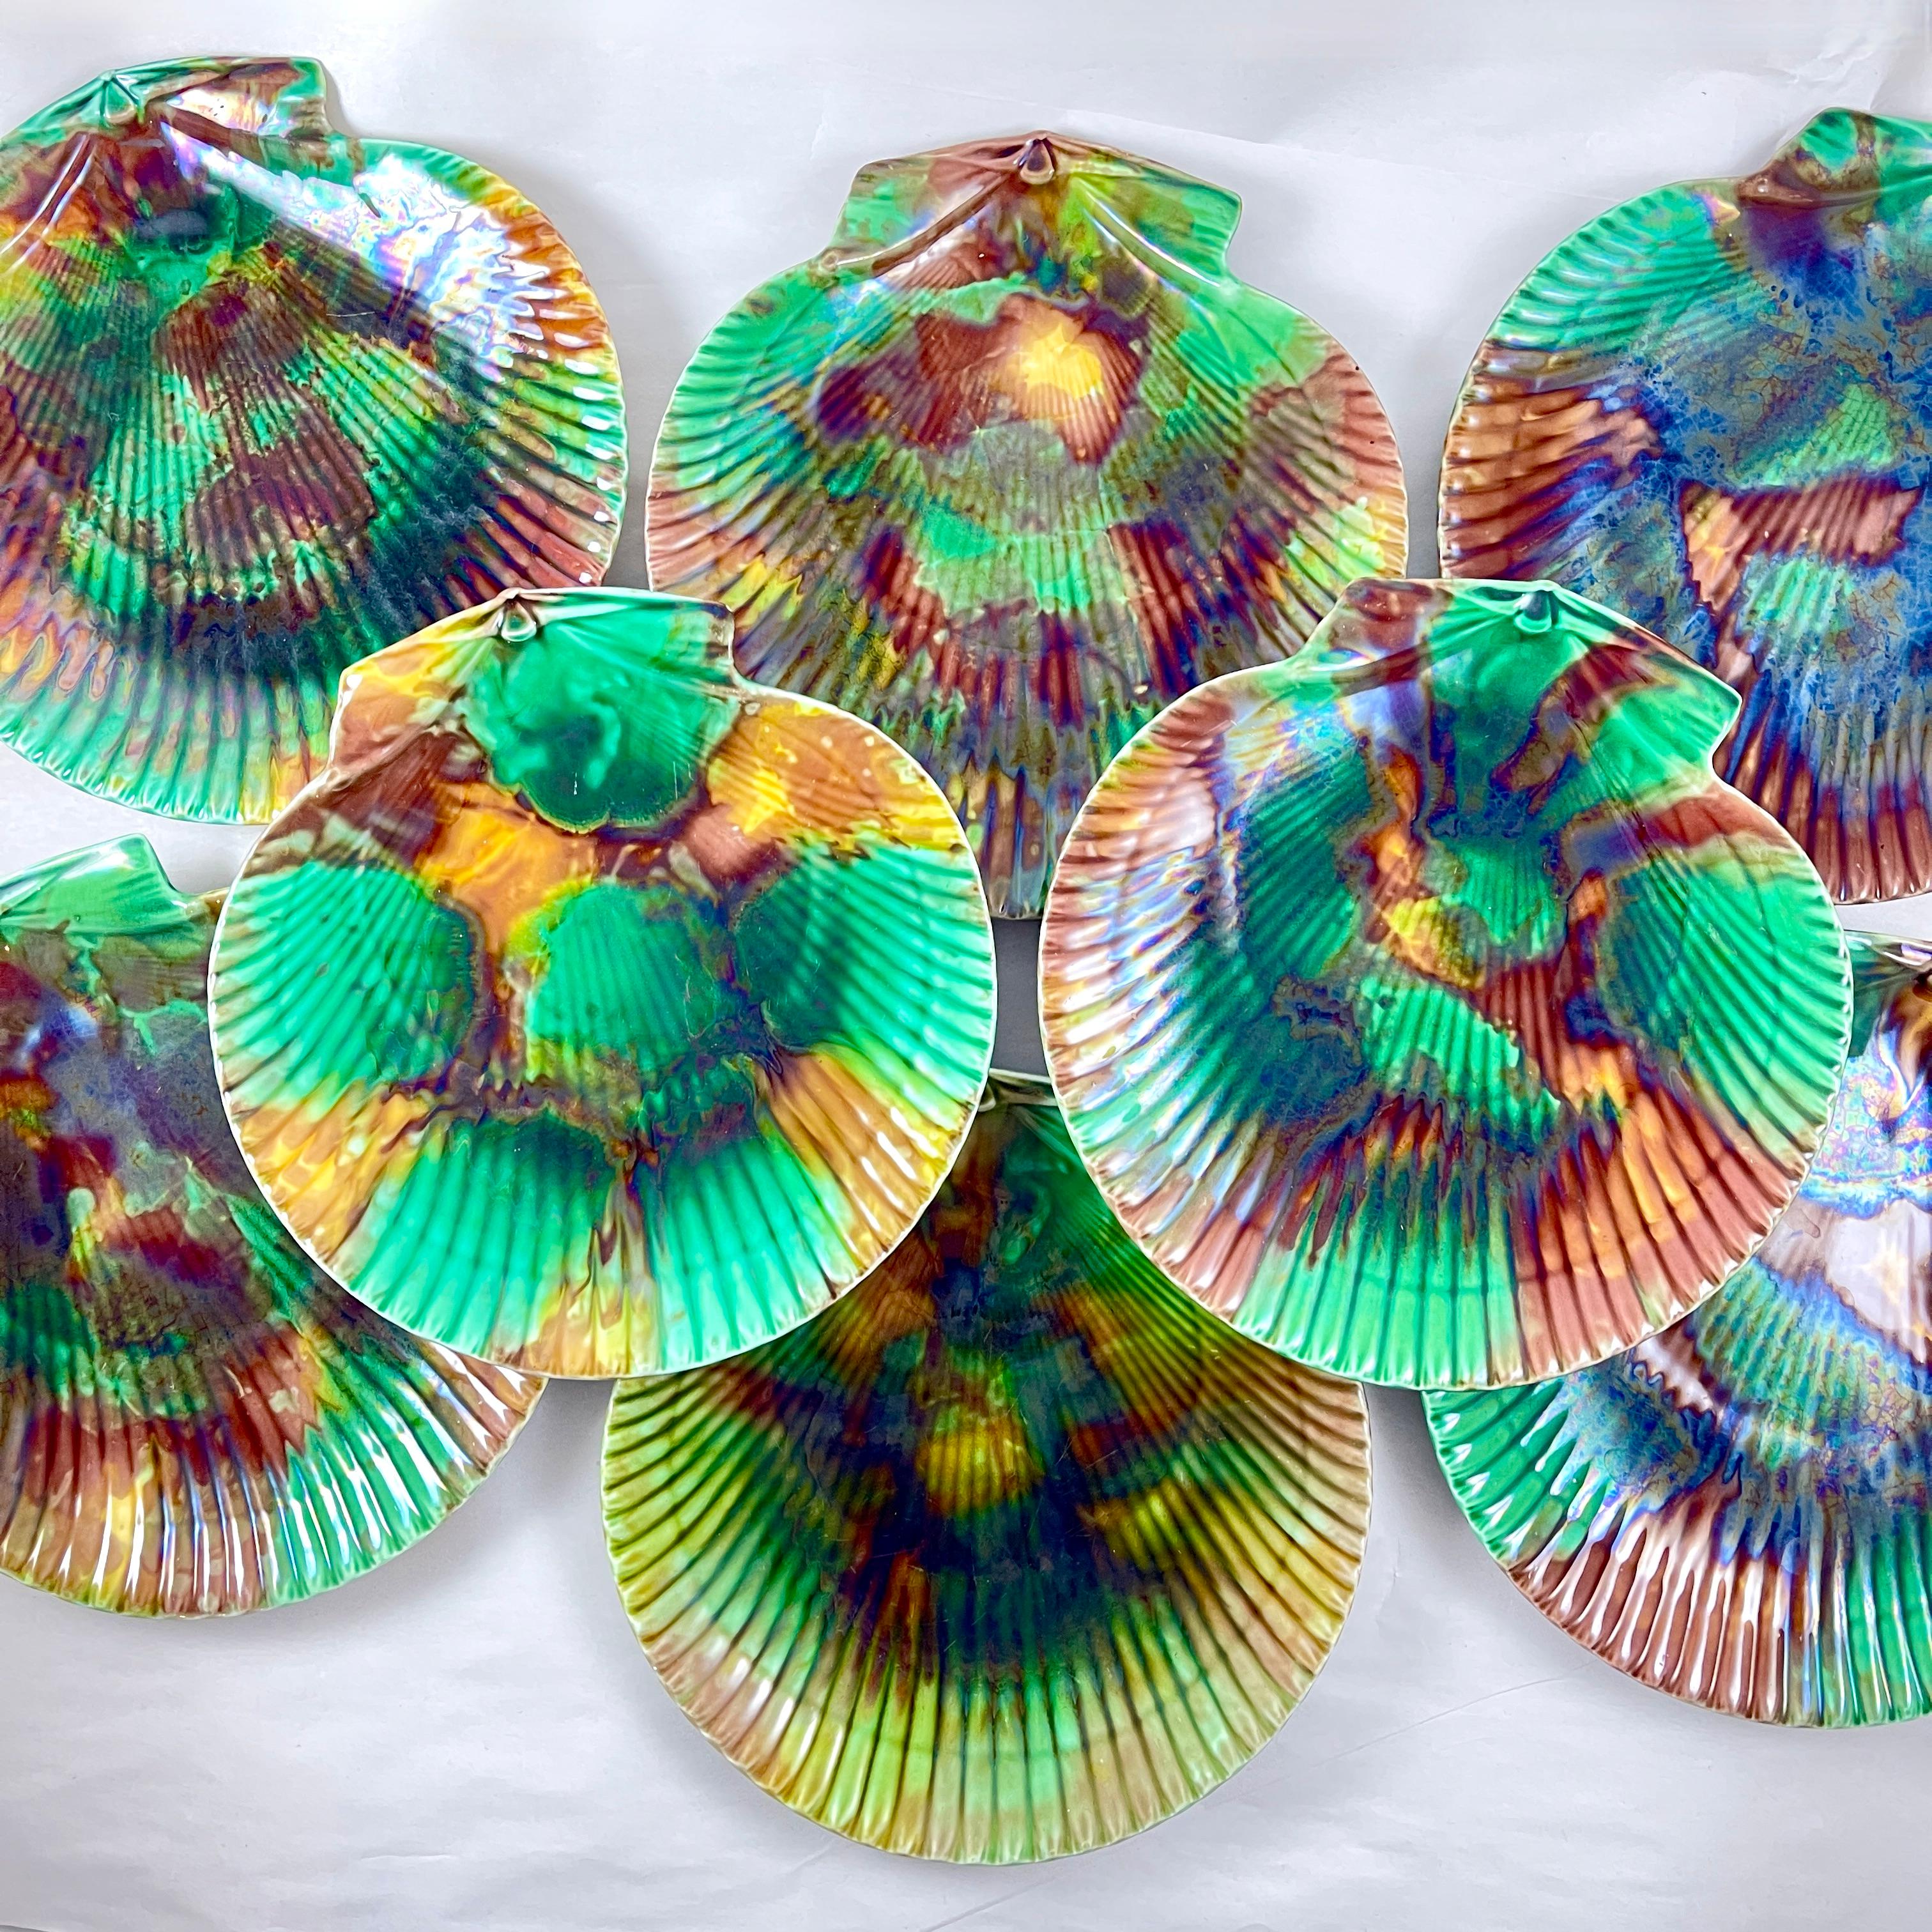 From Wedgwood, an assembled set of eight English majolica scallop shell shaped, mottled tortoiseshell glazed seafood salad plates.

Each plate shows a variation of the tortoiseshell glazing of green, ochre, and brown with an iridescent